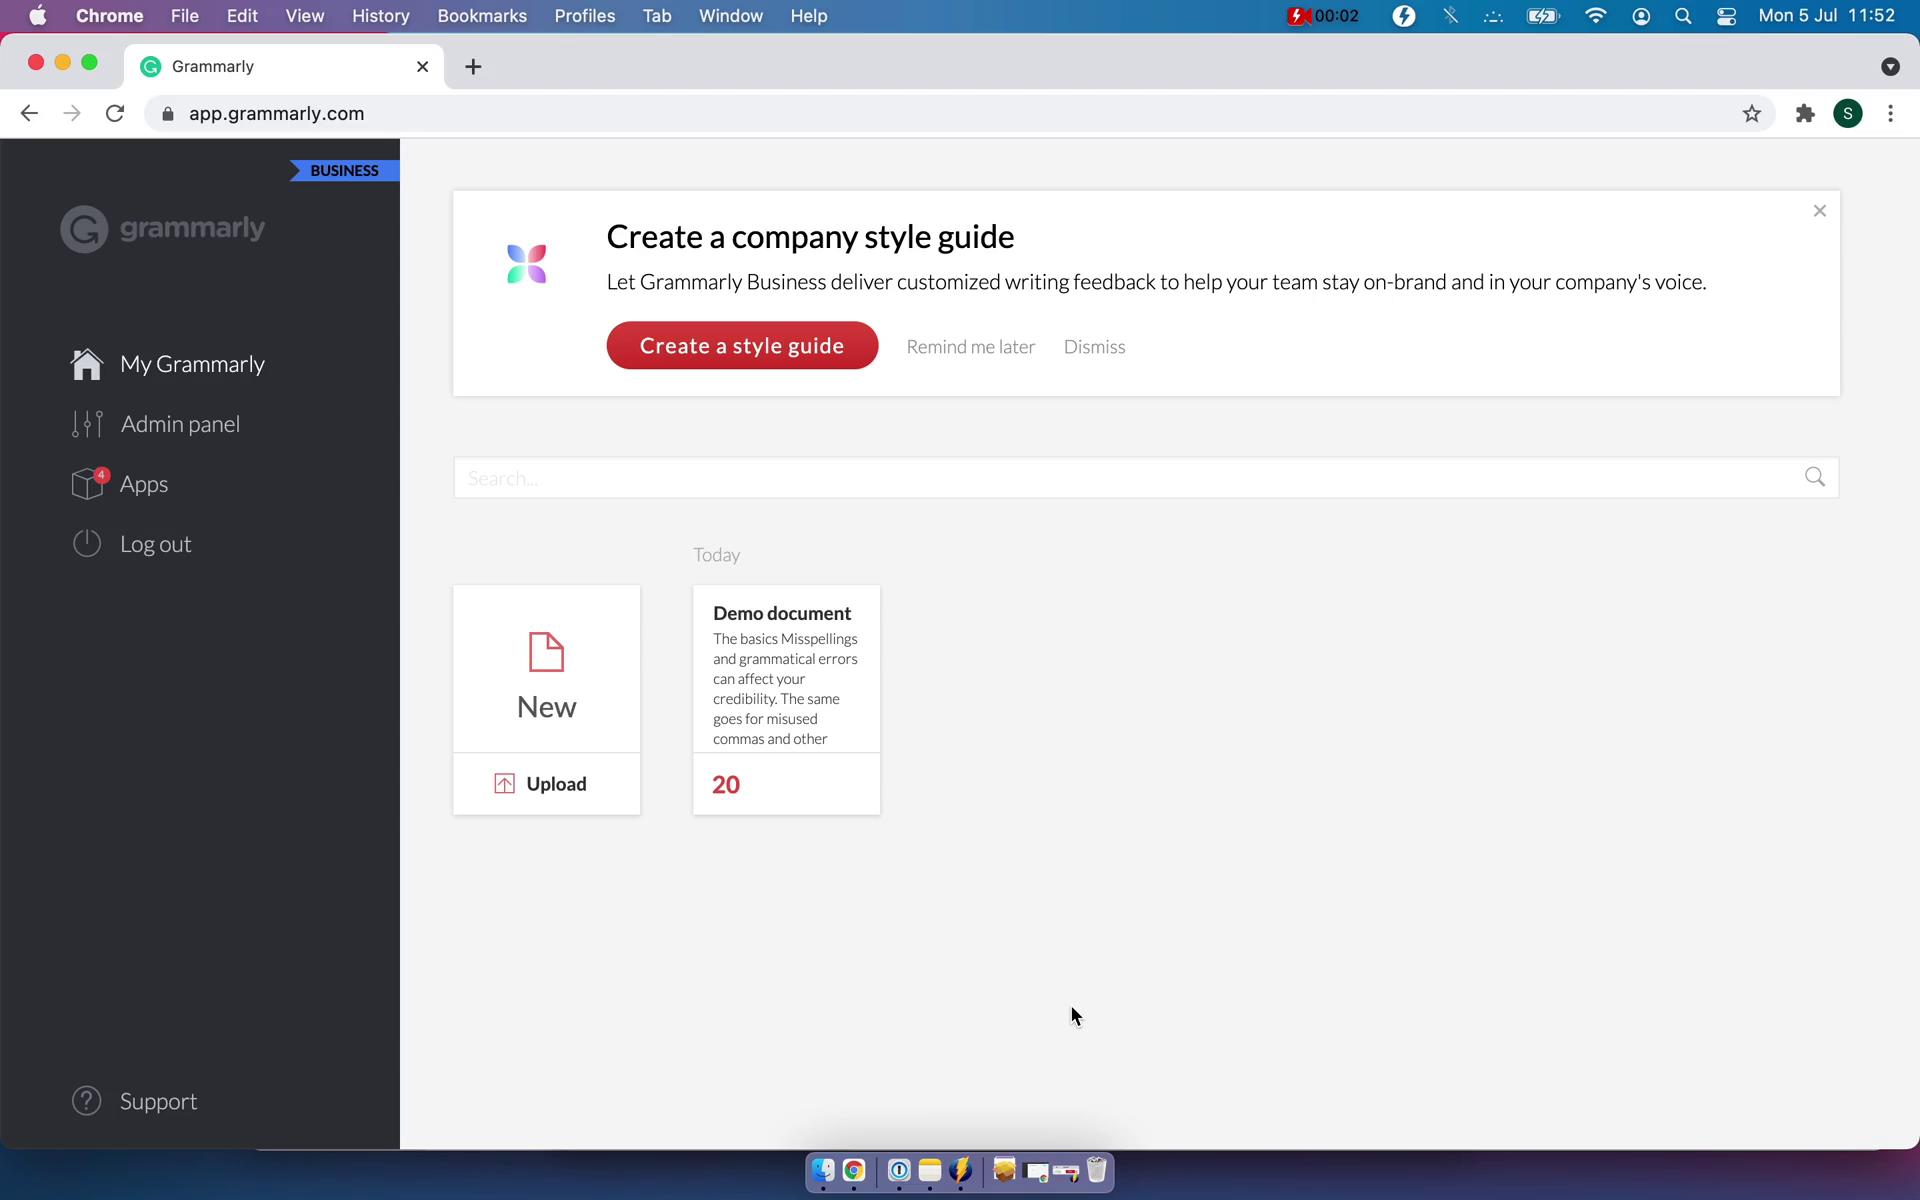 Screenshot of Creating a document on Grammarly